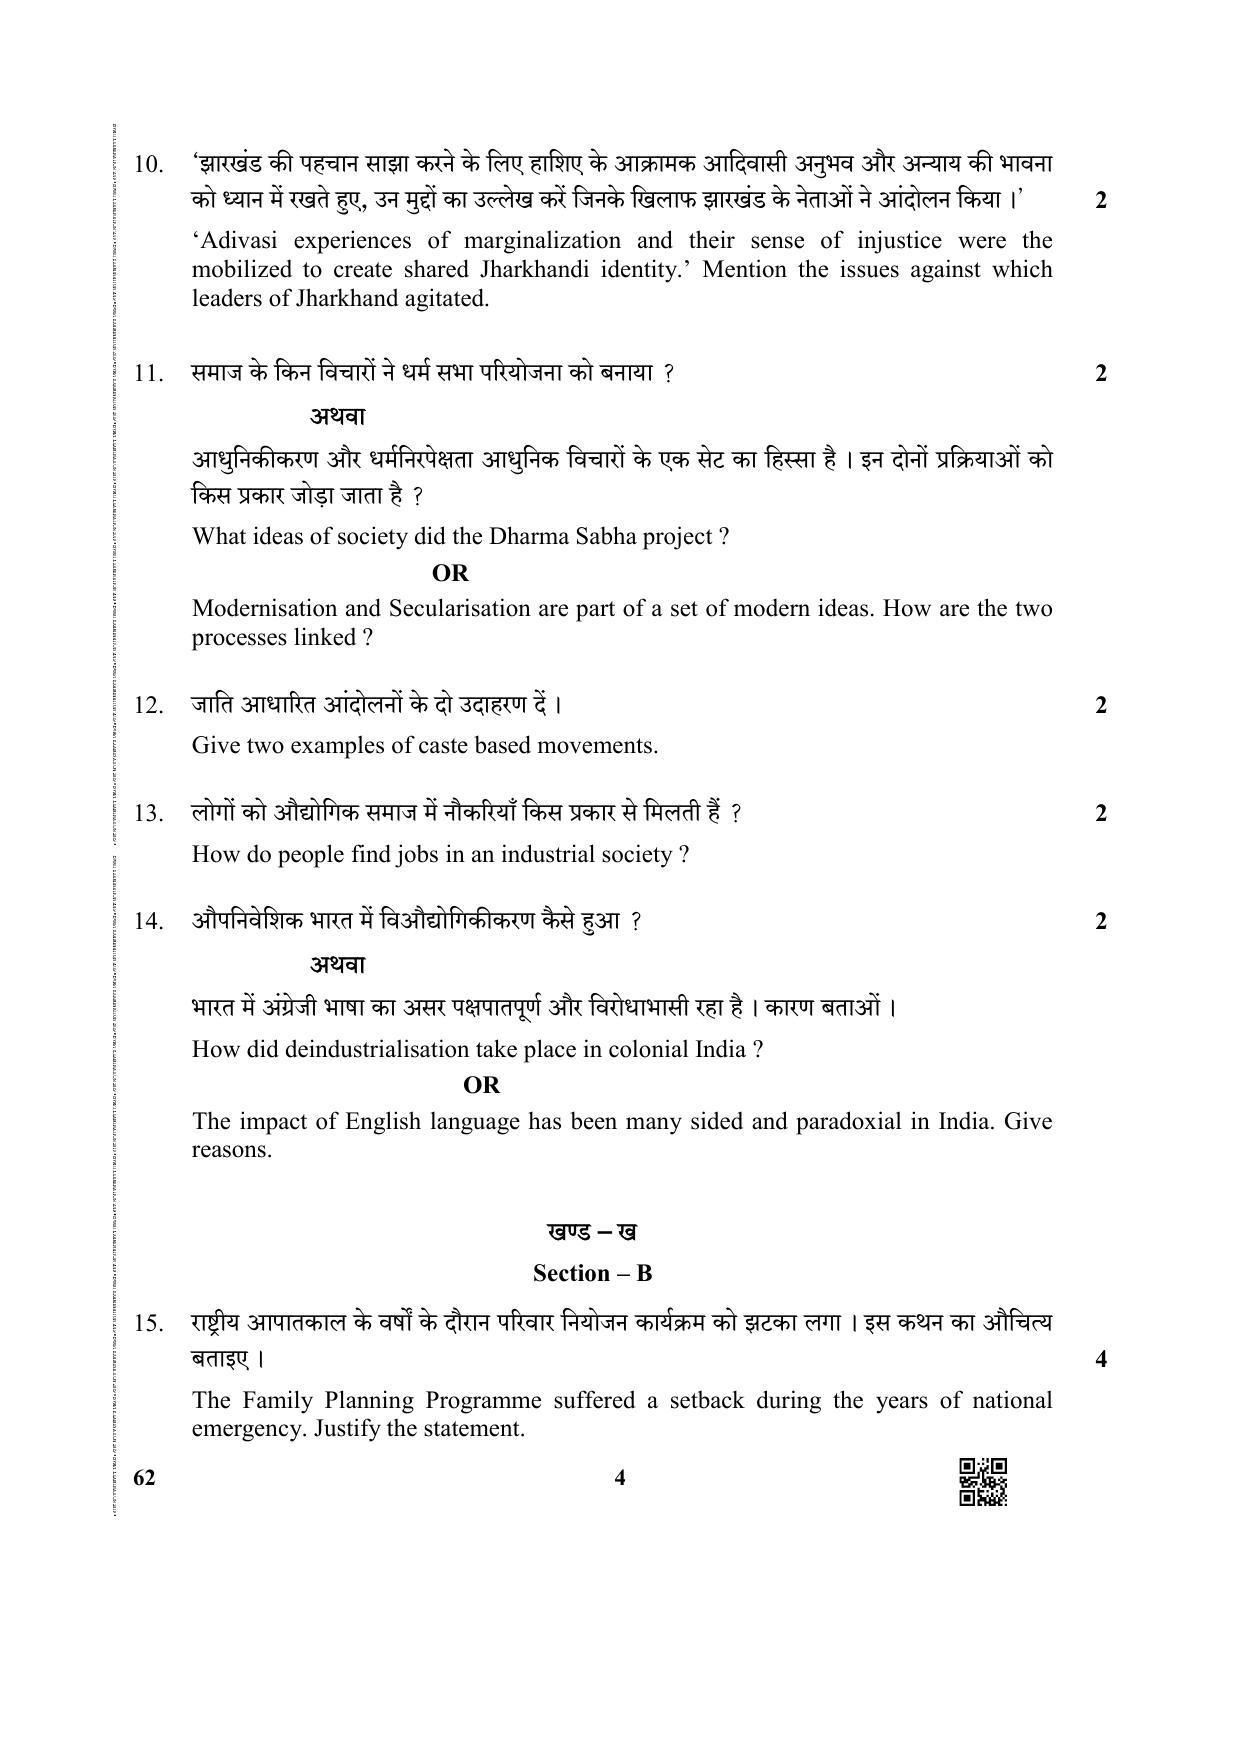 CBSE Class 12 62 (Sociology) 2019 Question Paper - Page 4